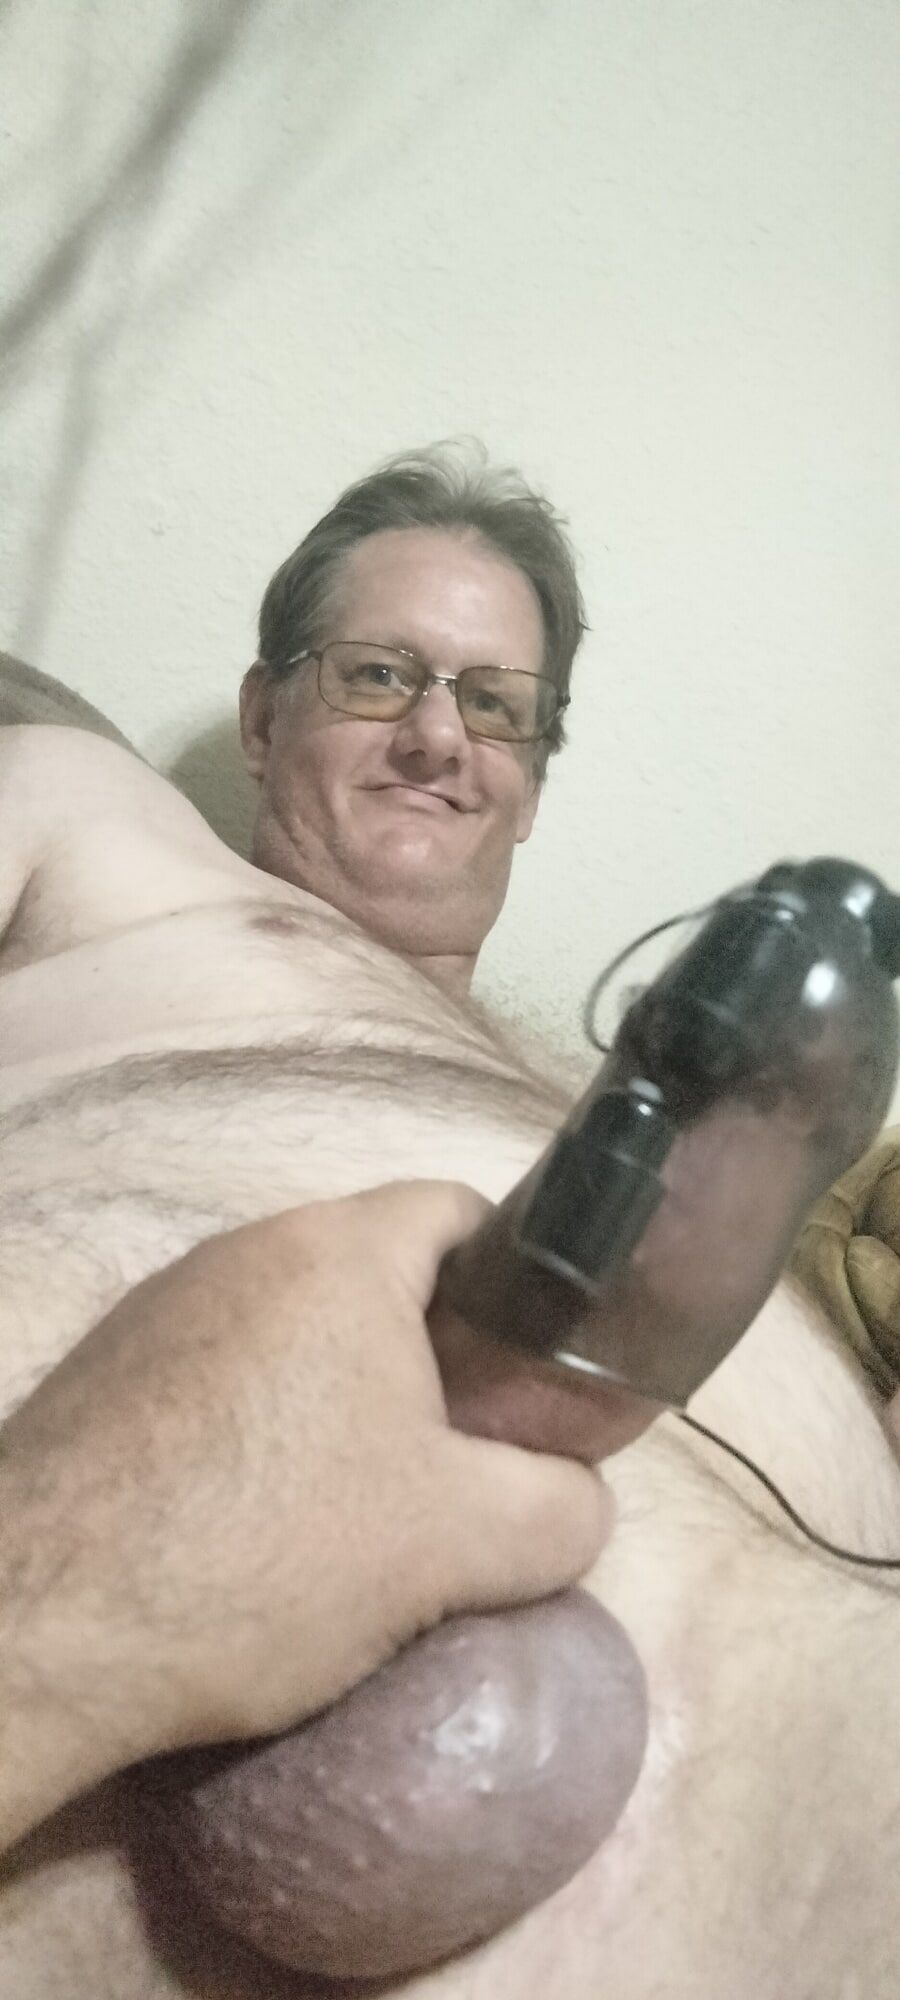 My ass has toys and my cock  #8